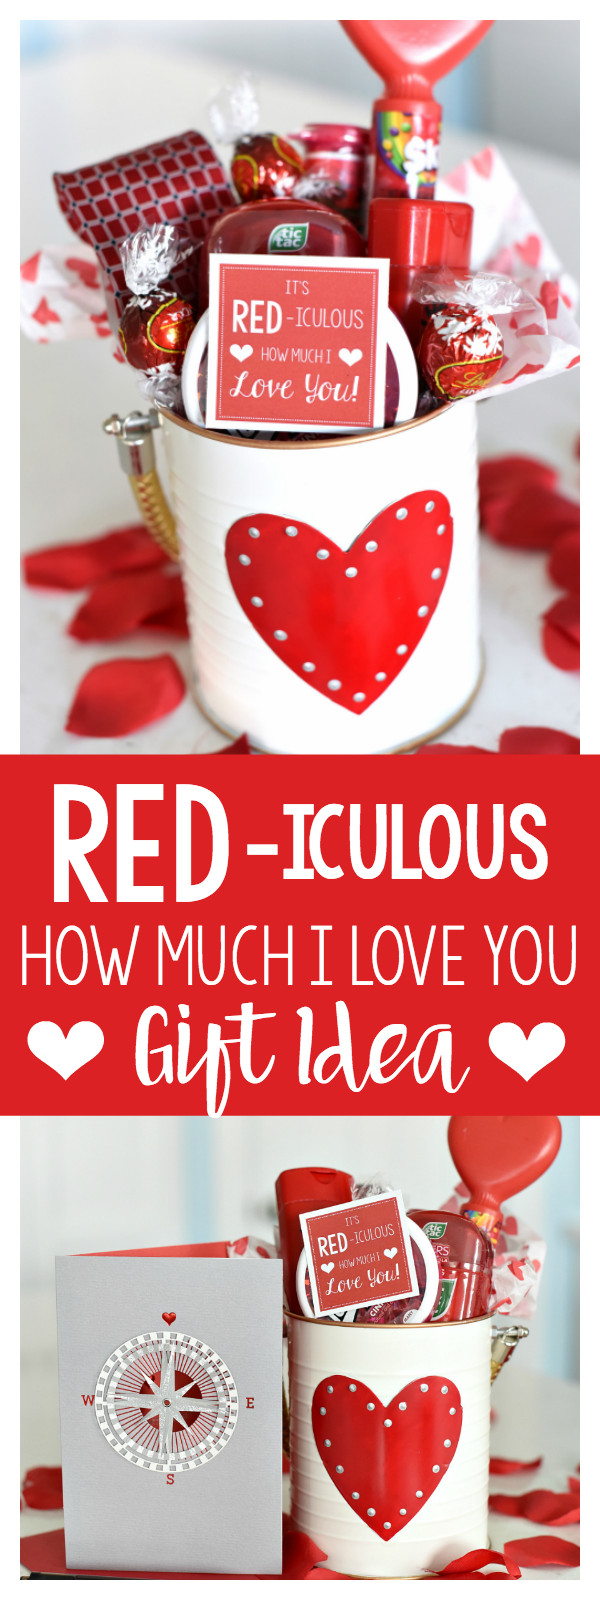 Valentine Day Gift Ideas
 Cute Valentine s Day Gift Idea RED iculous Basket